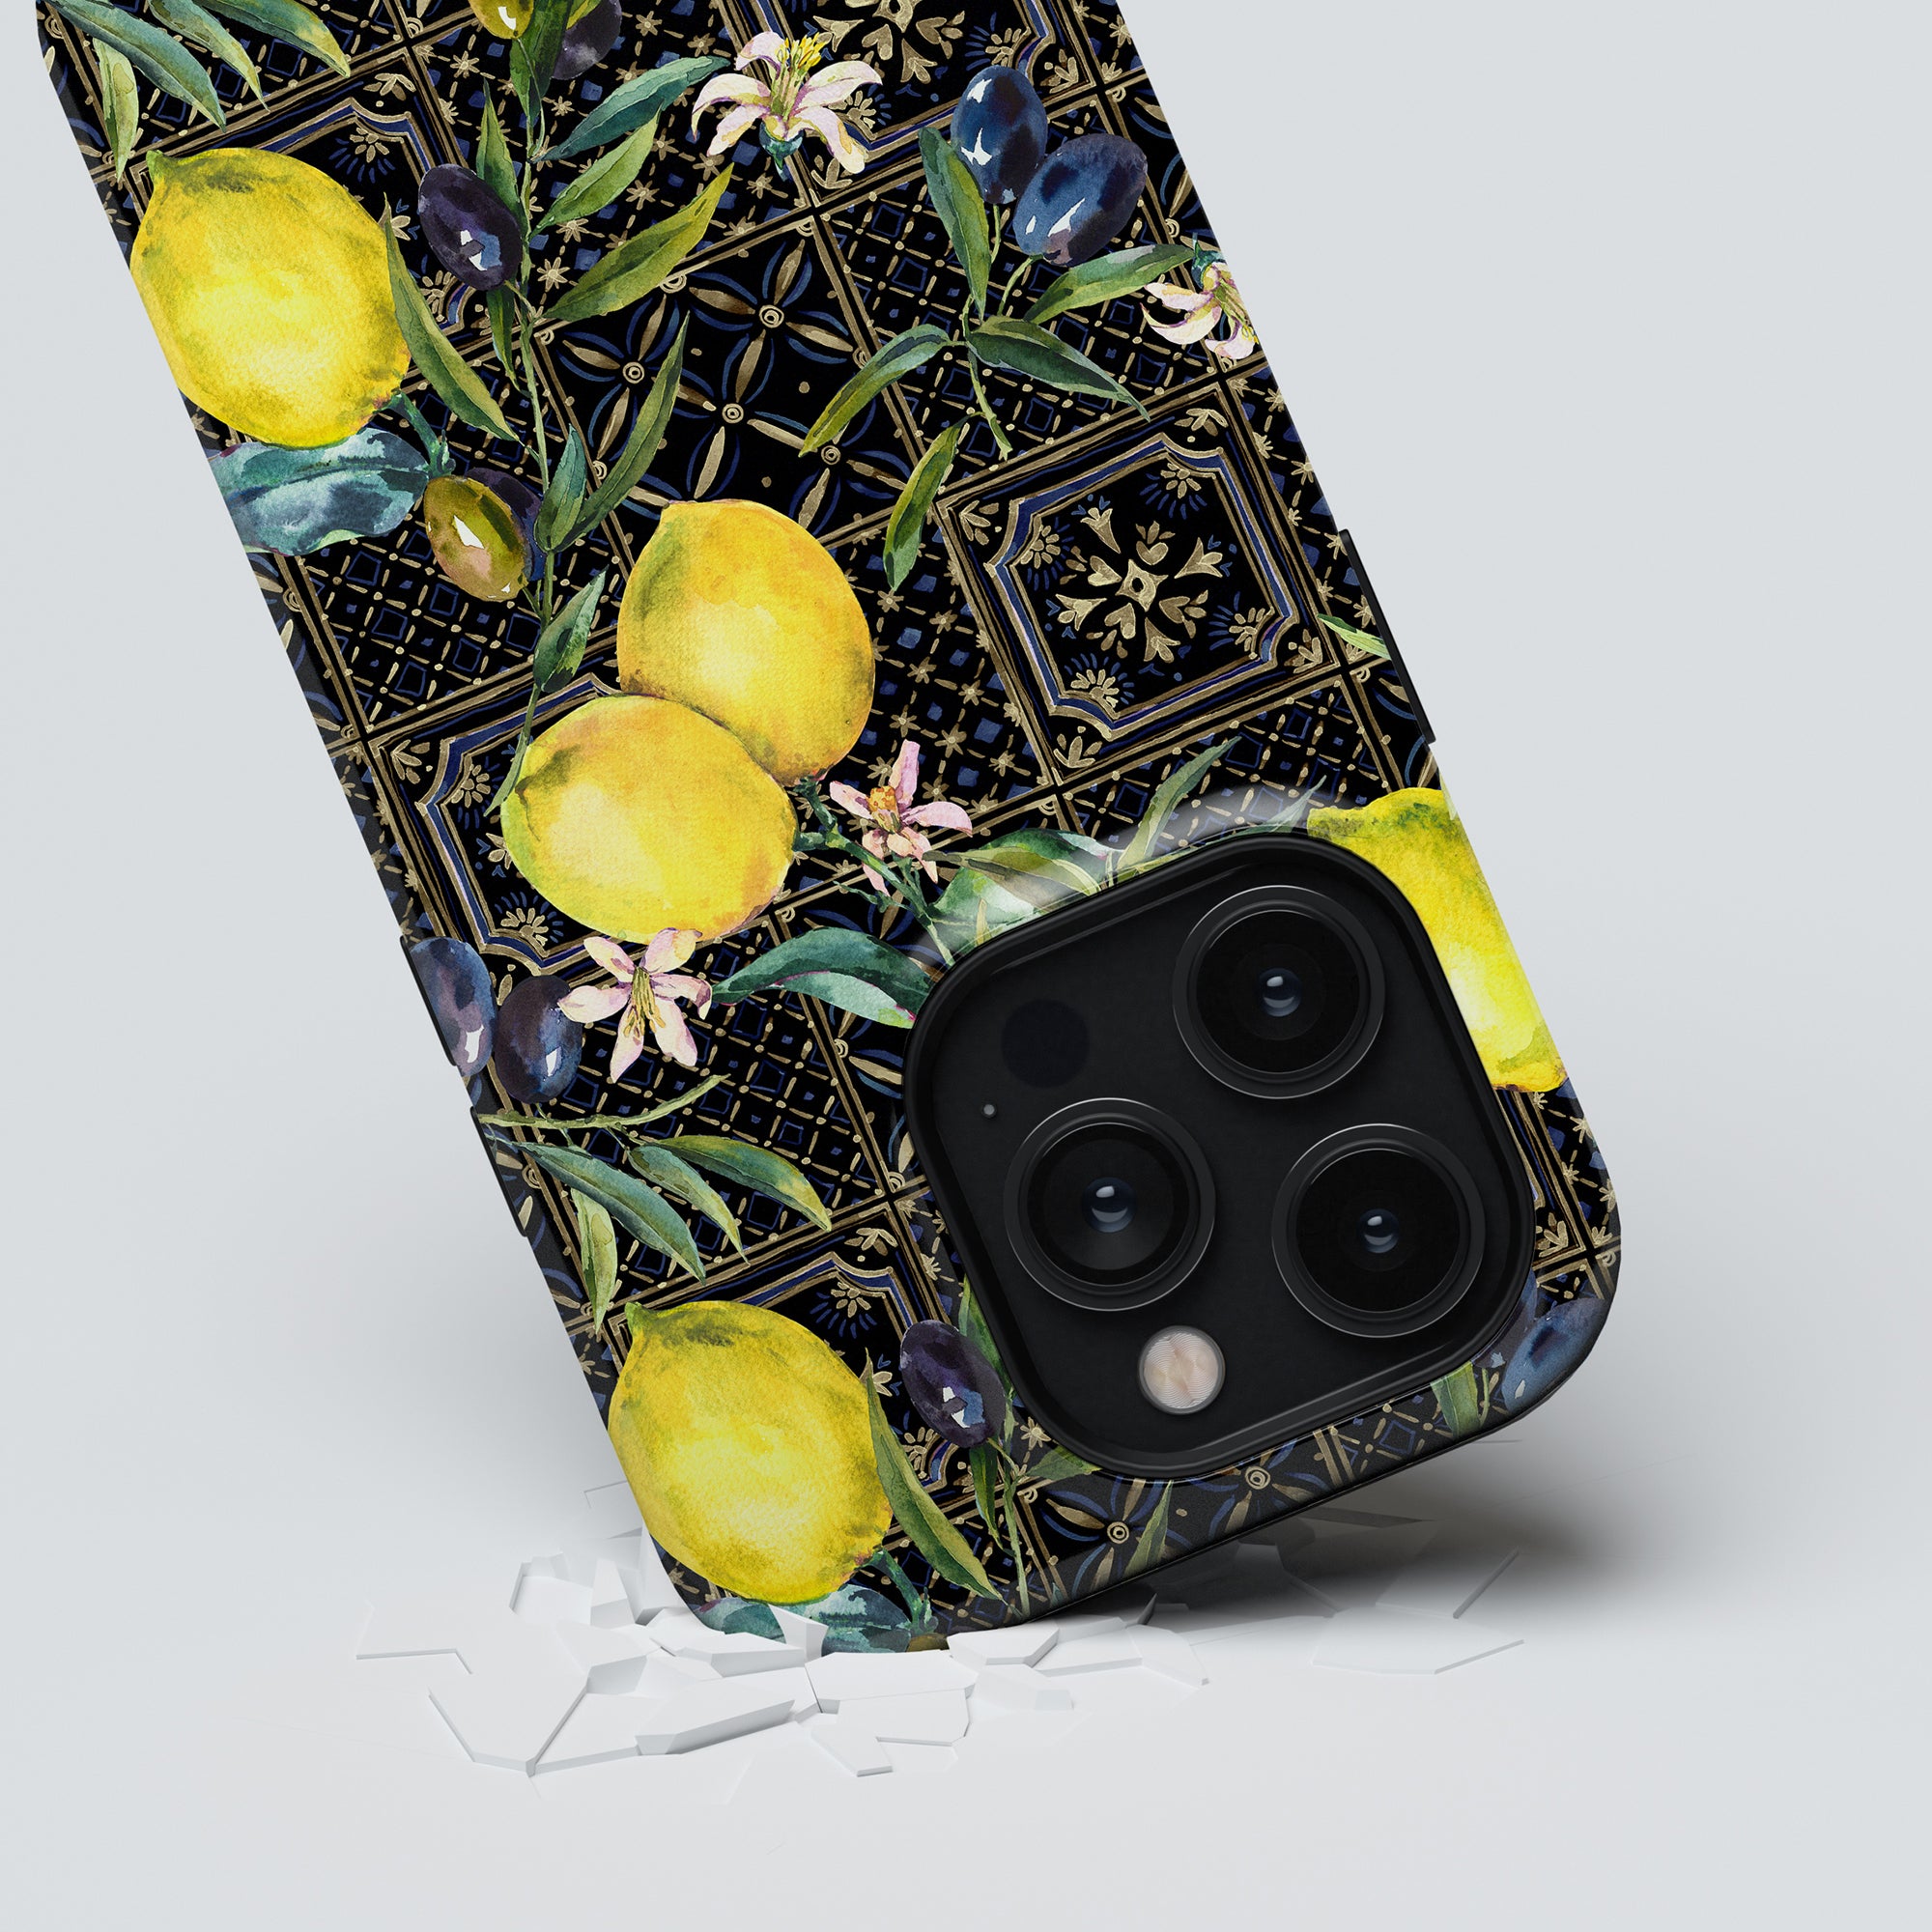 Sorrento - Tough Case with a floral and lemon patterned case made of eco-friendly materials breaking through a surface.